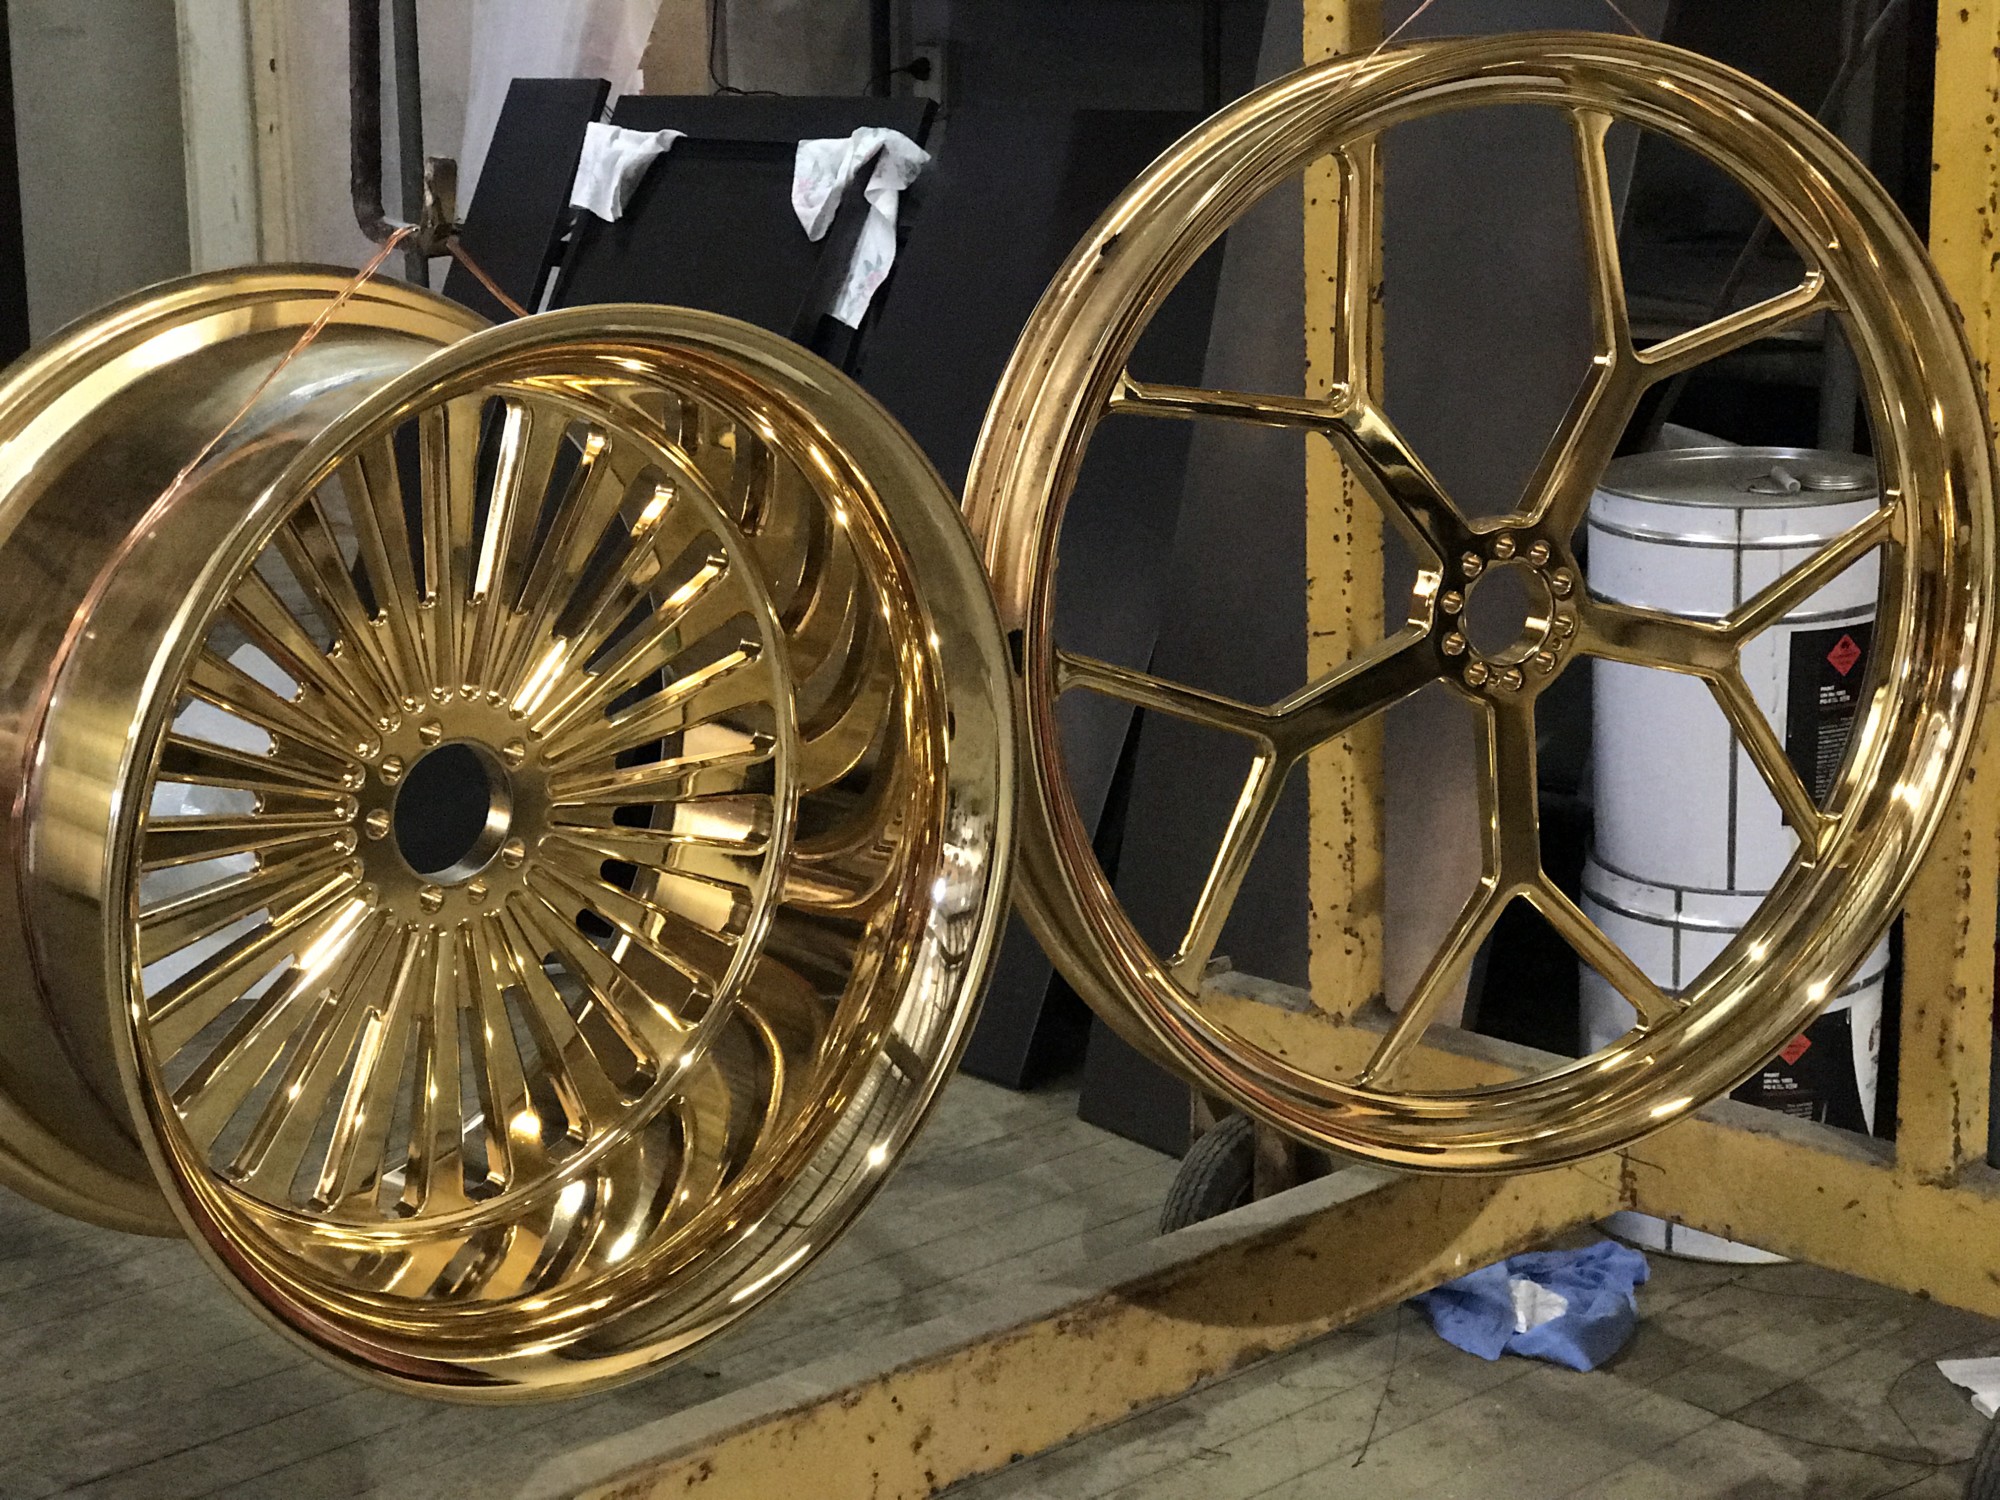 Stripped, mirror polished & gold-plated Harley Davidson front & rear rims